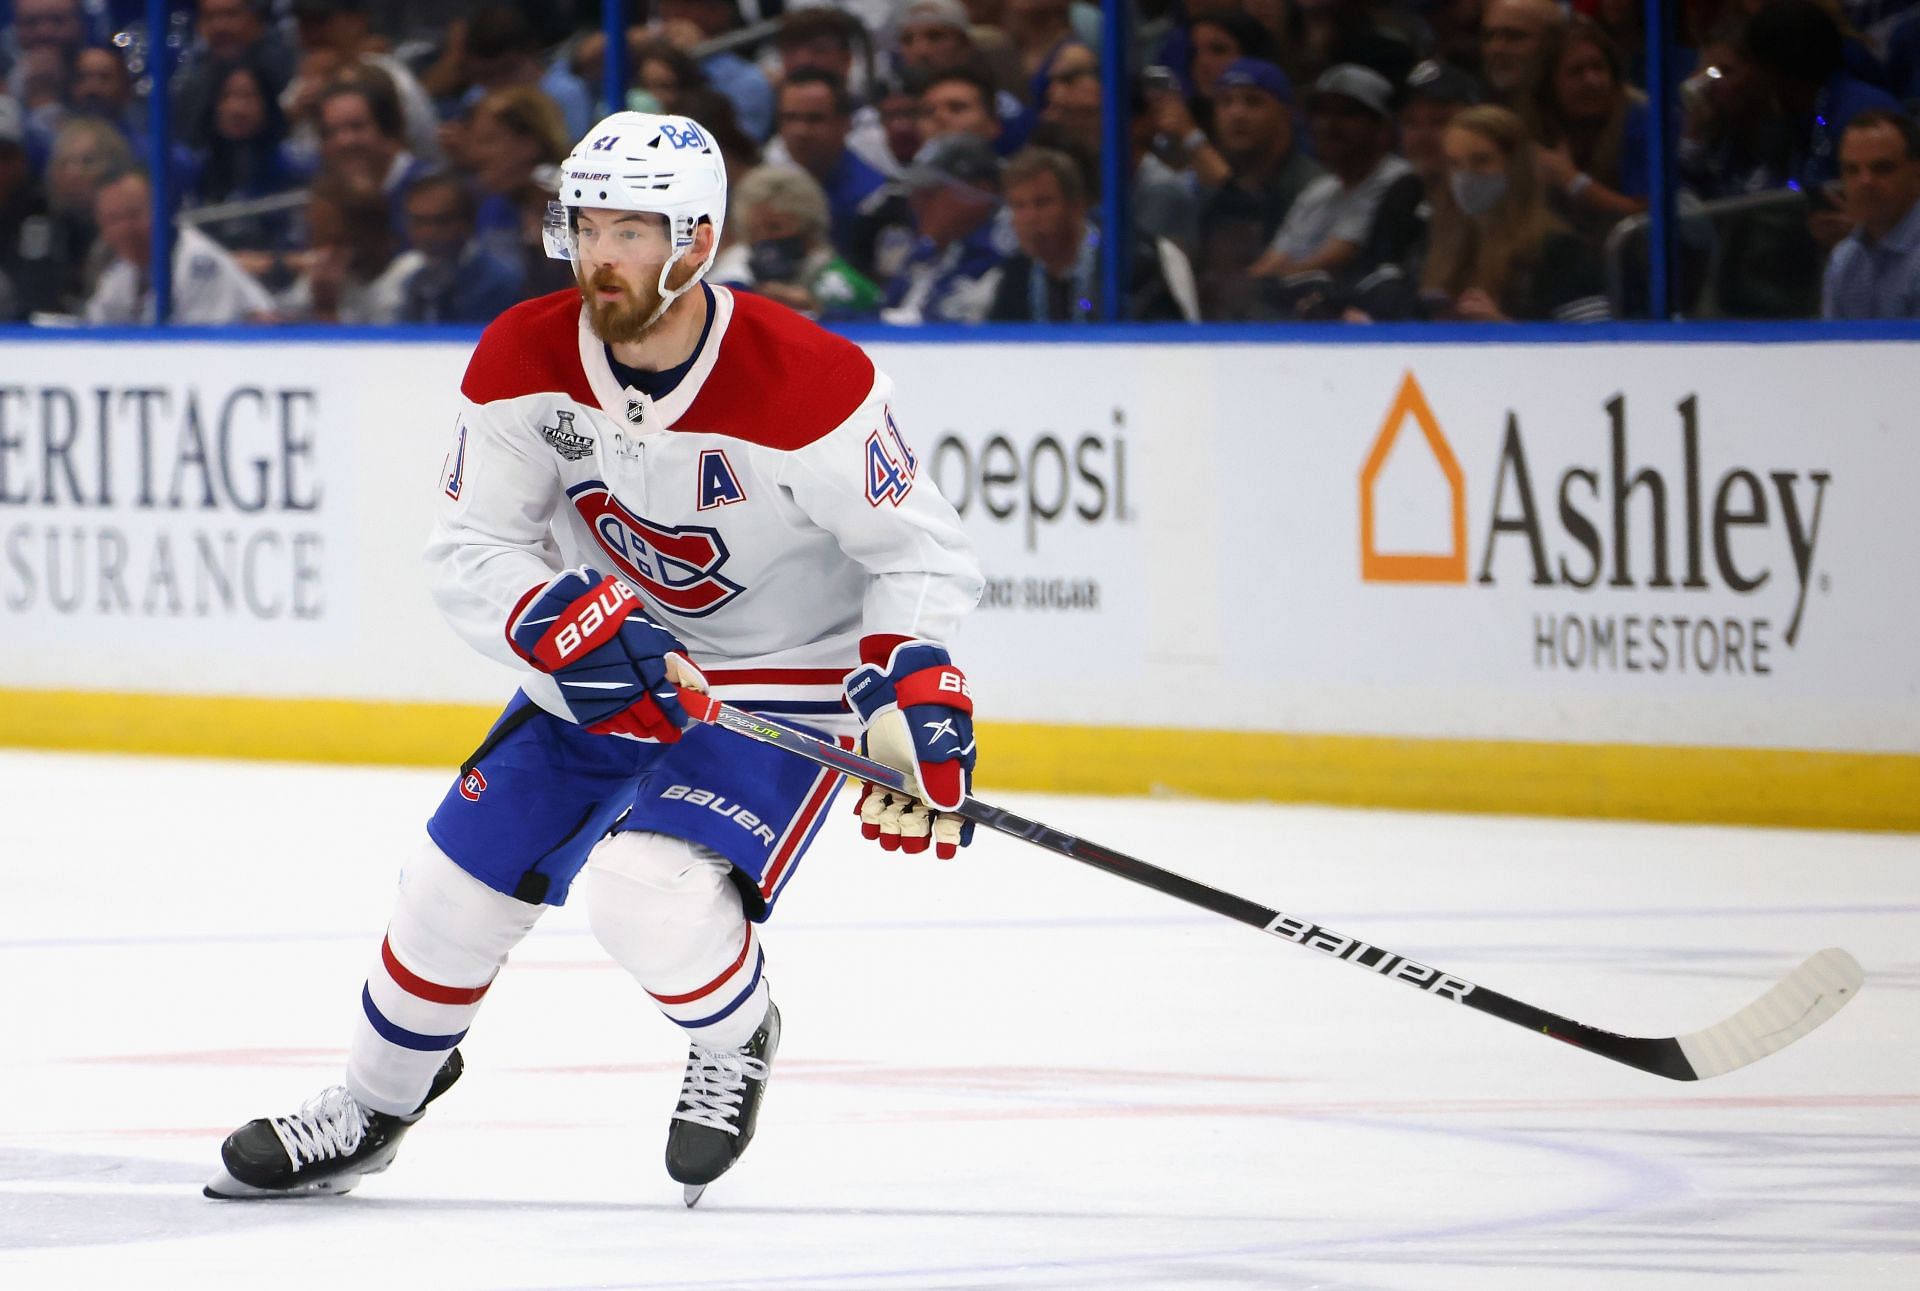 Paul Byron, Montreal Canadiens at the 2021 NHL Stanley Cup Final